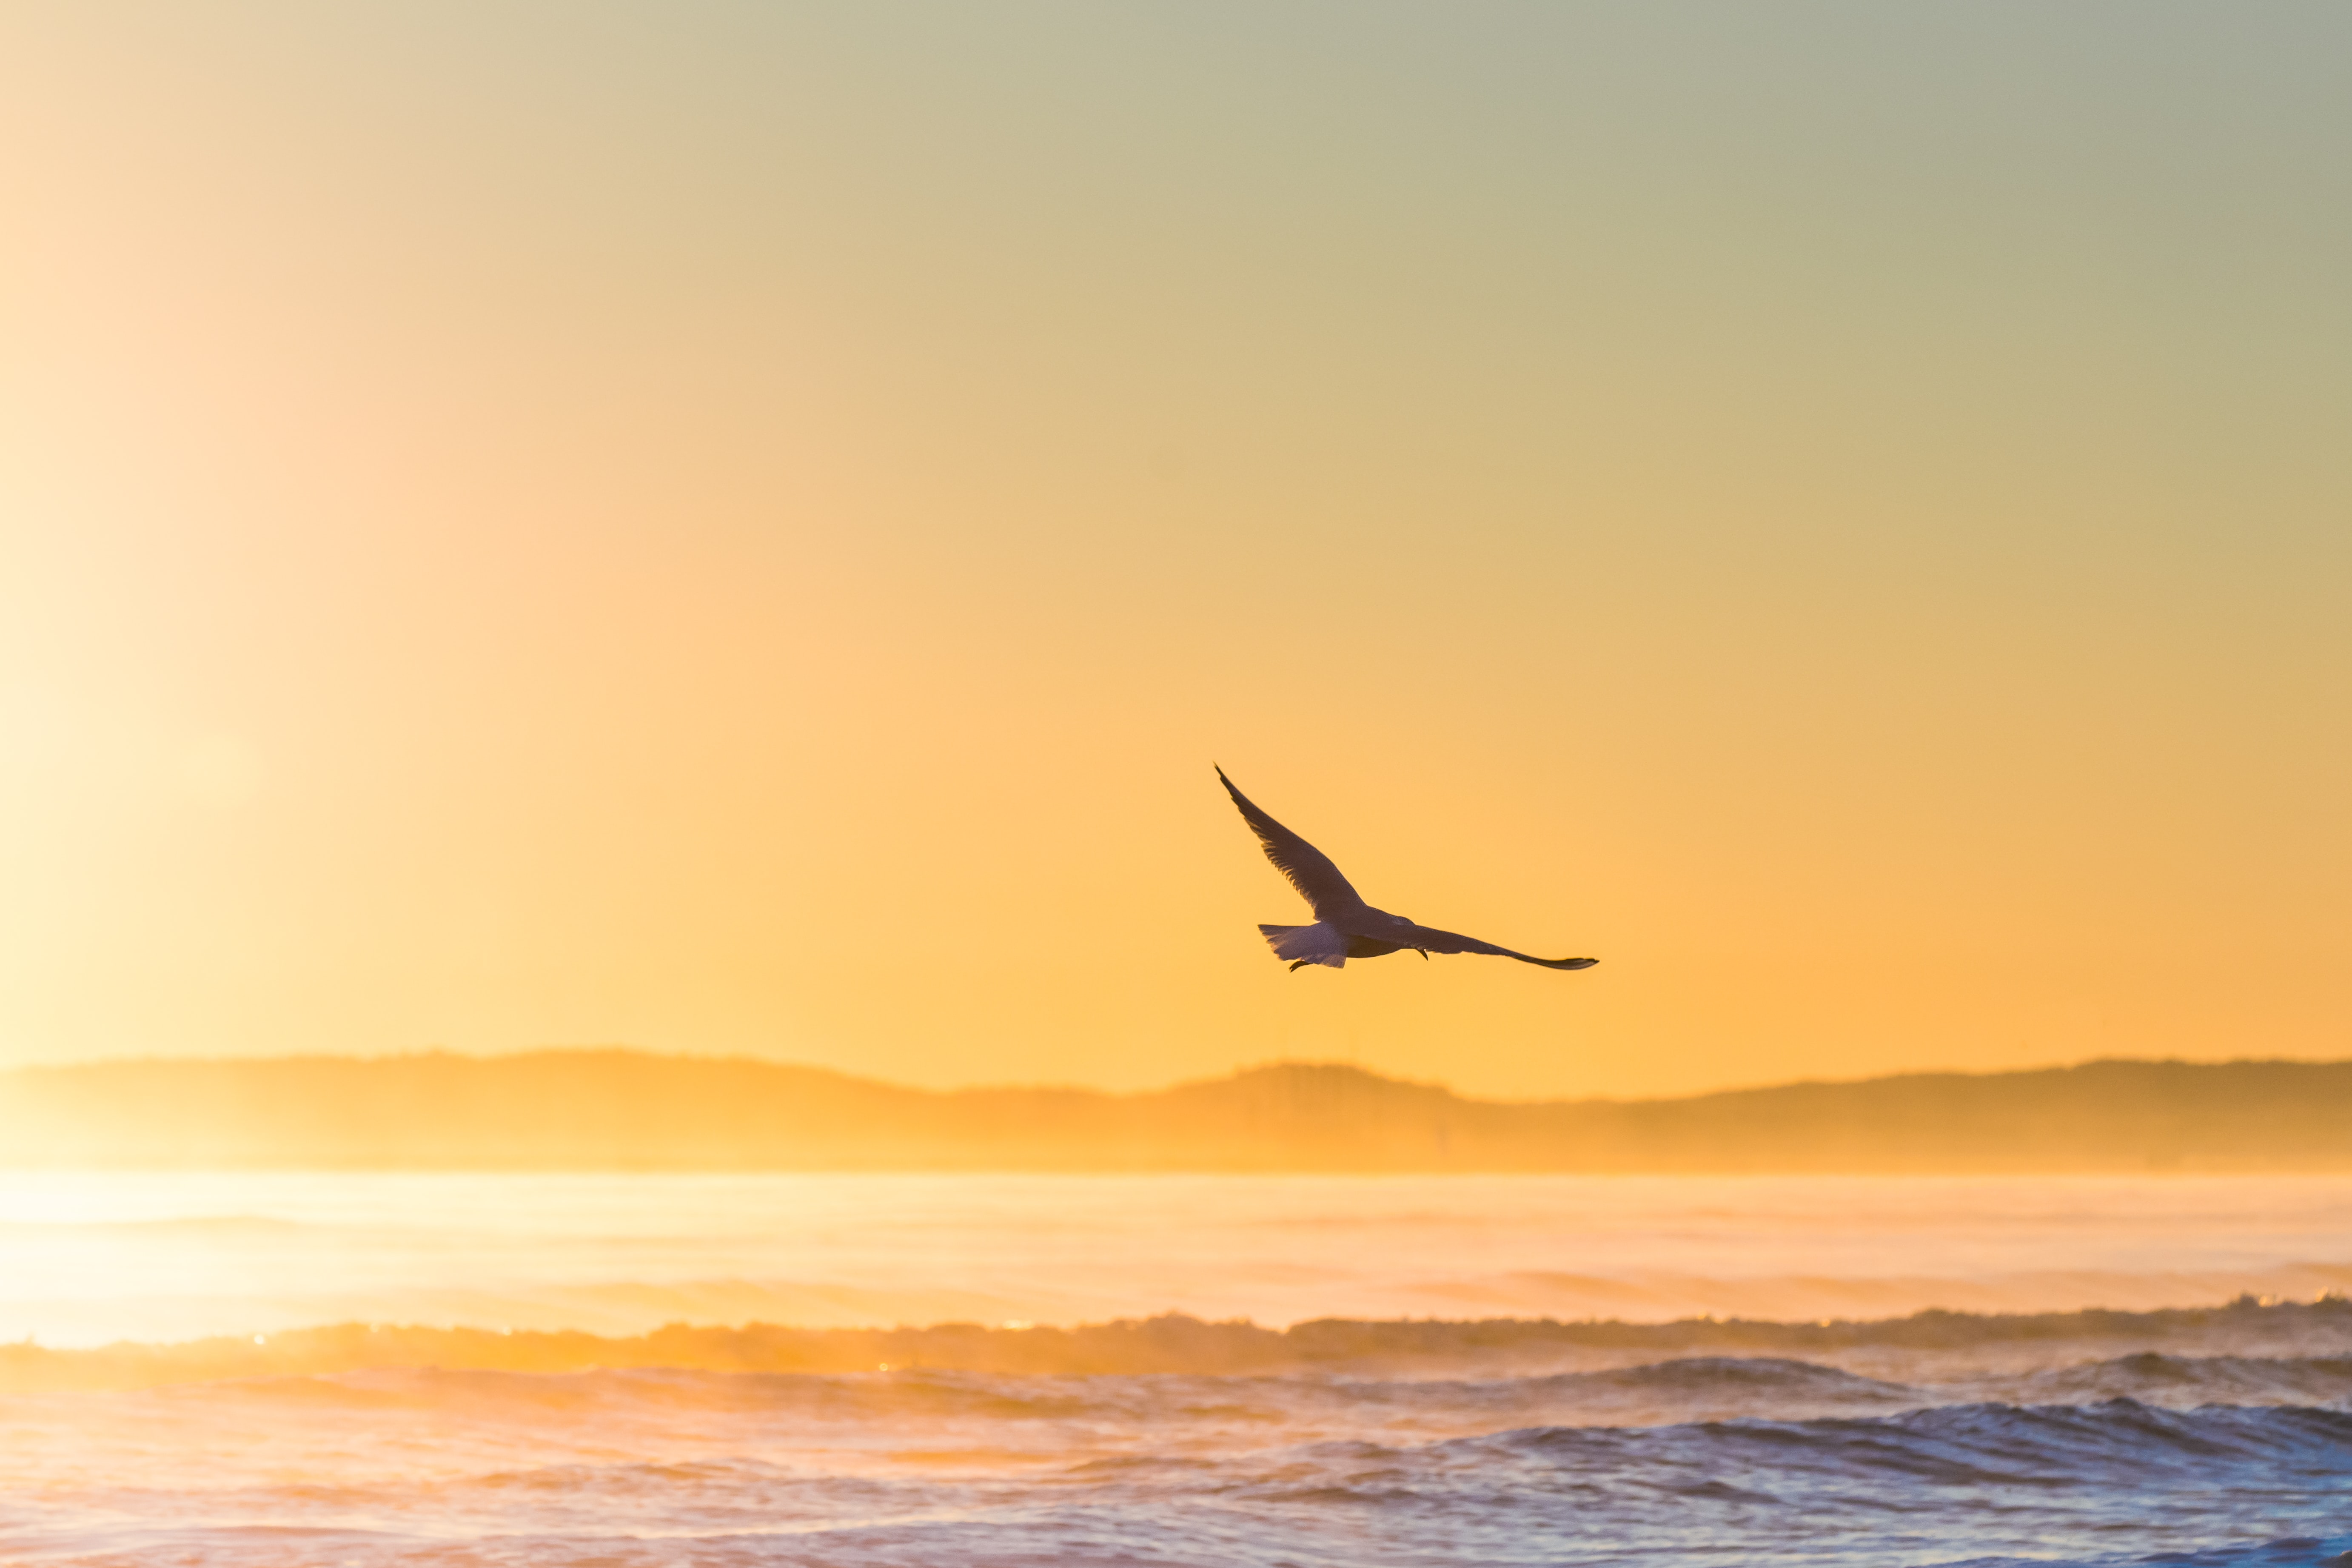 A bird flying over the ocean during a beautiful sunset. - Sunshine